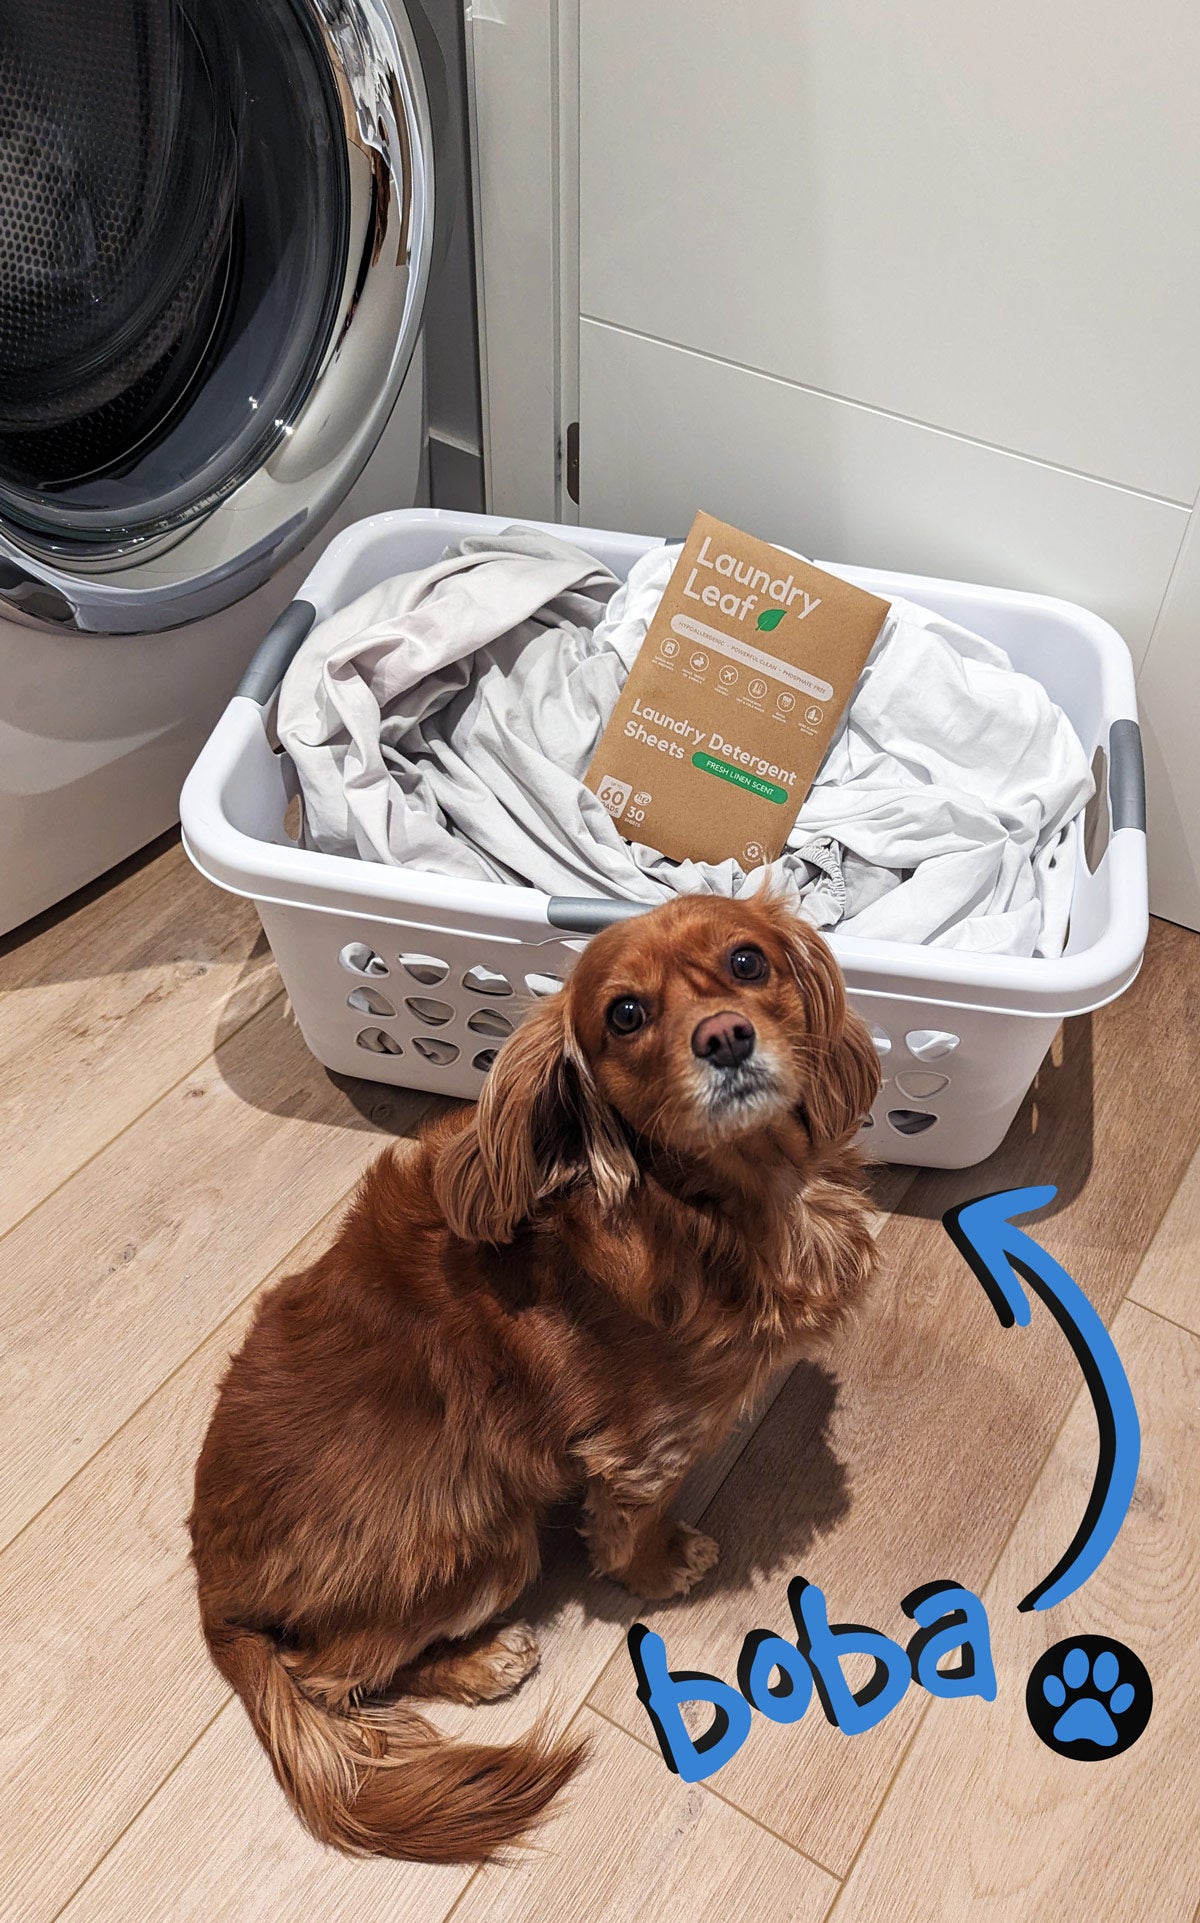 Image of a dog with the name Boba Fett in front of a laundry basket